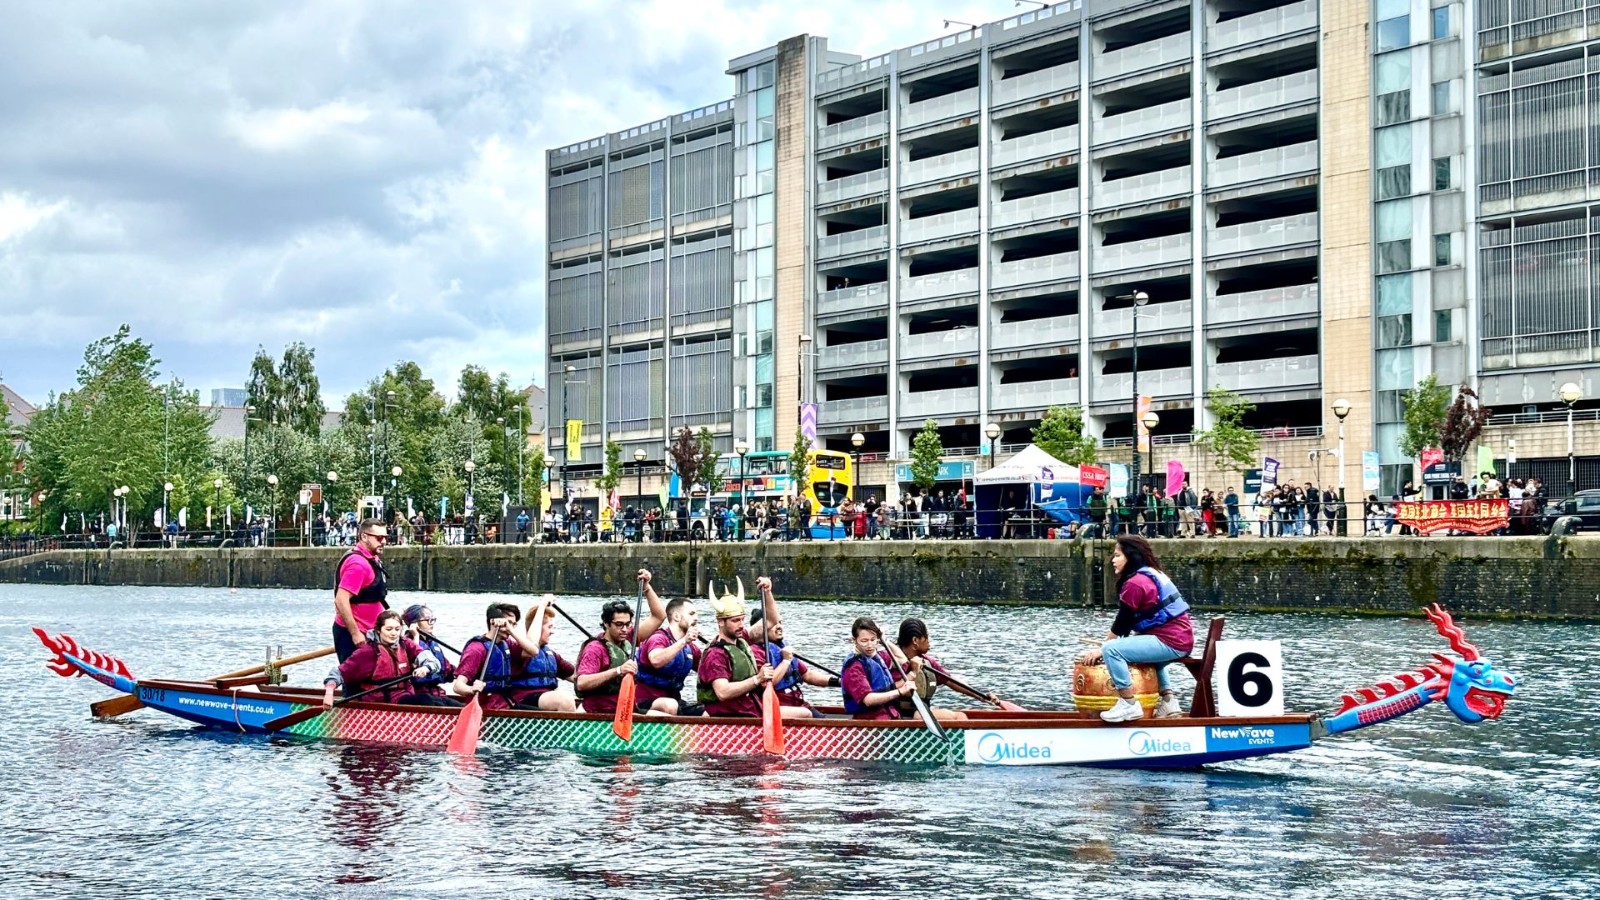 Dragon Boat Racing participants get ready for the competition at Salford Quays. /CGTN
